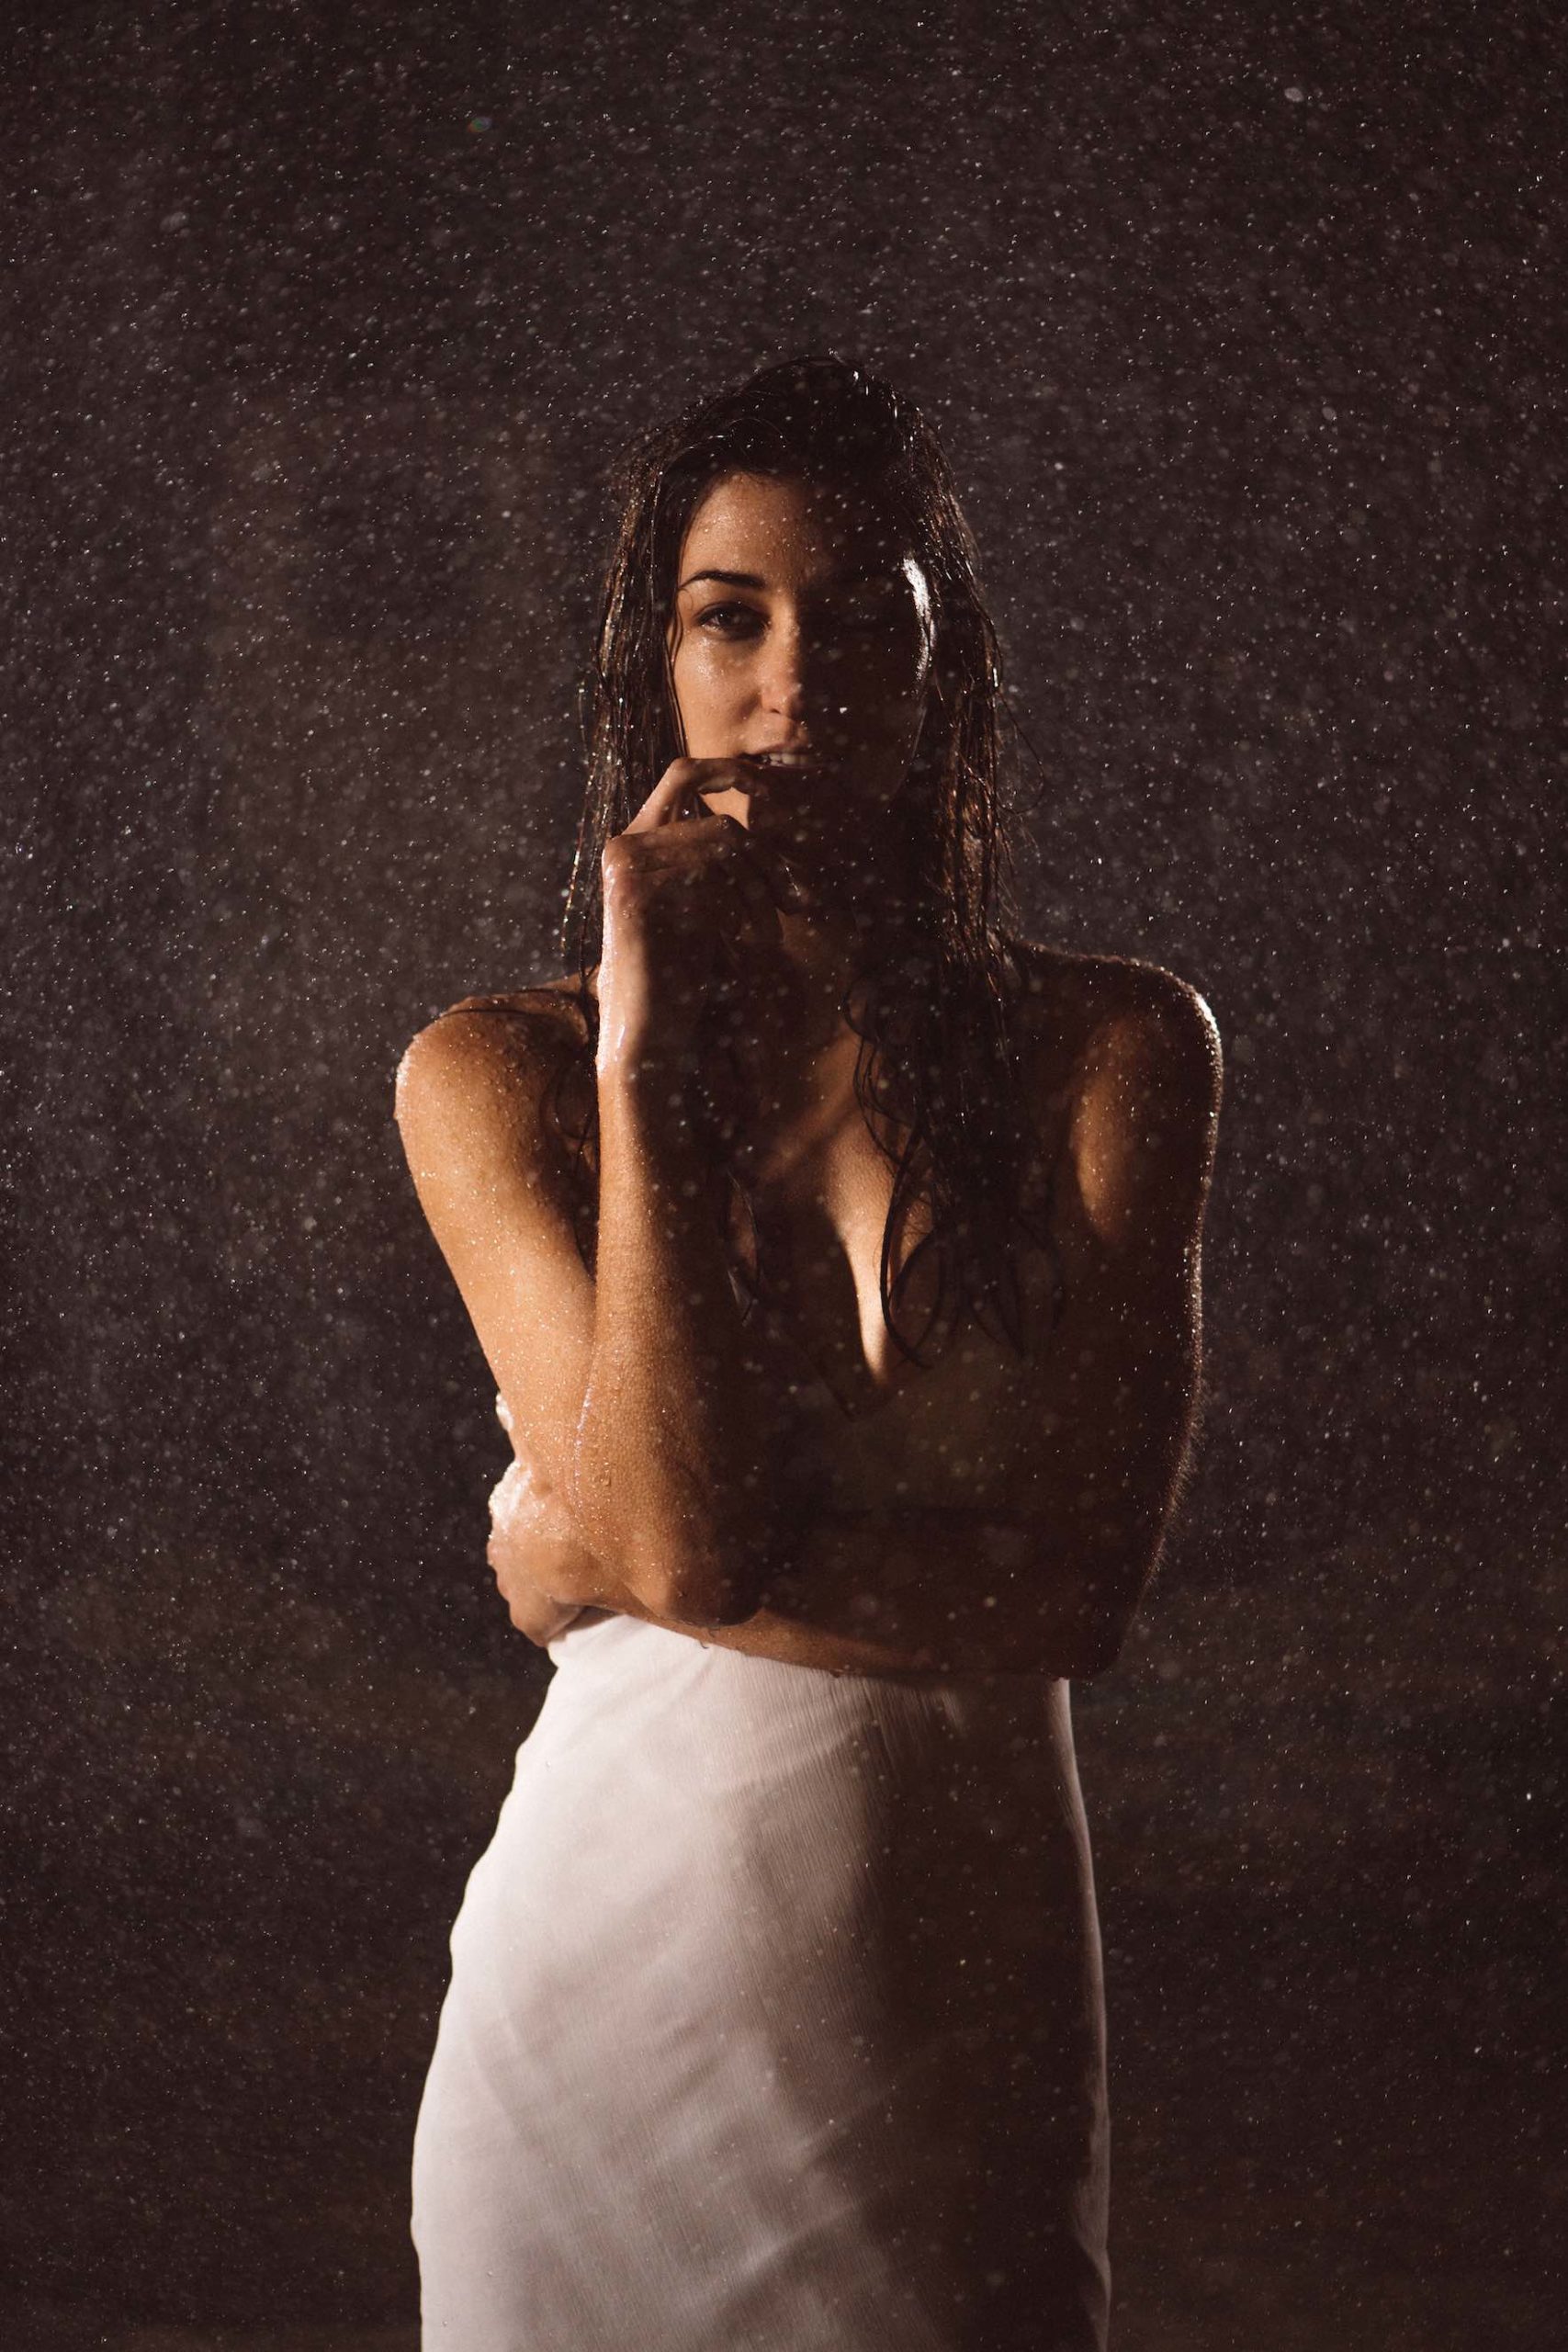 Crew Call Rain and Water Woman with long hair wearing a white dress posing for camera under a shower of water with fingertip by her mouth